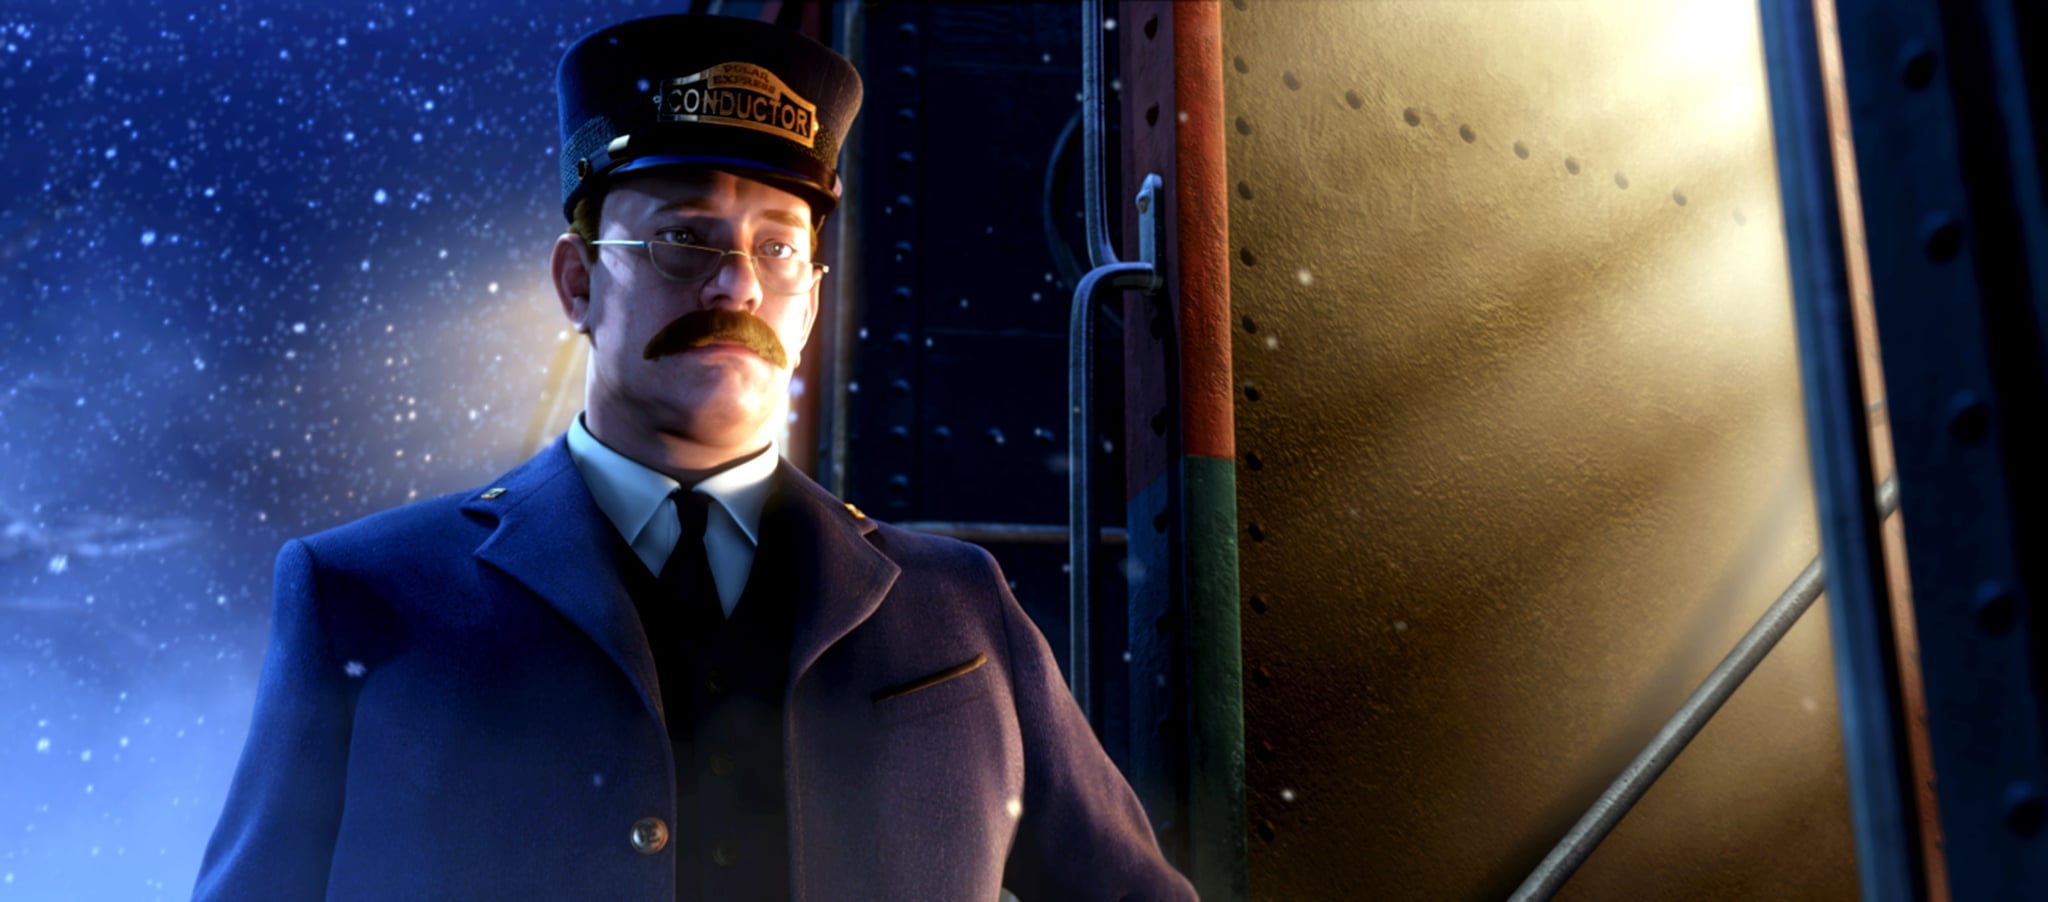 Conductor, The Polar Express | 22 Iconic Tom Hanks Roles You Can Re-Create  on Halloween Night | POPSUGAR Entertainment Photo 8